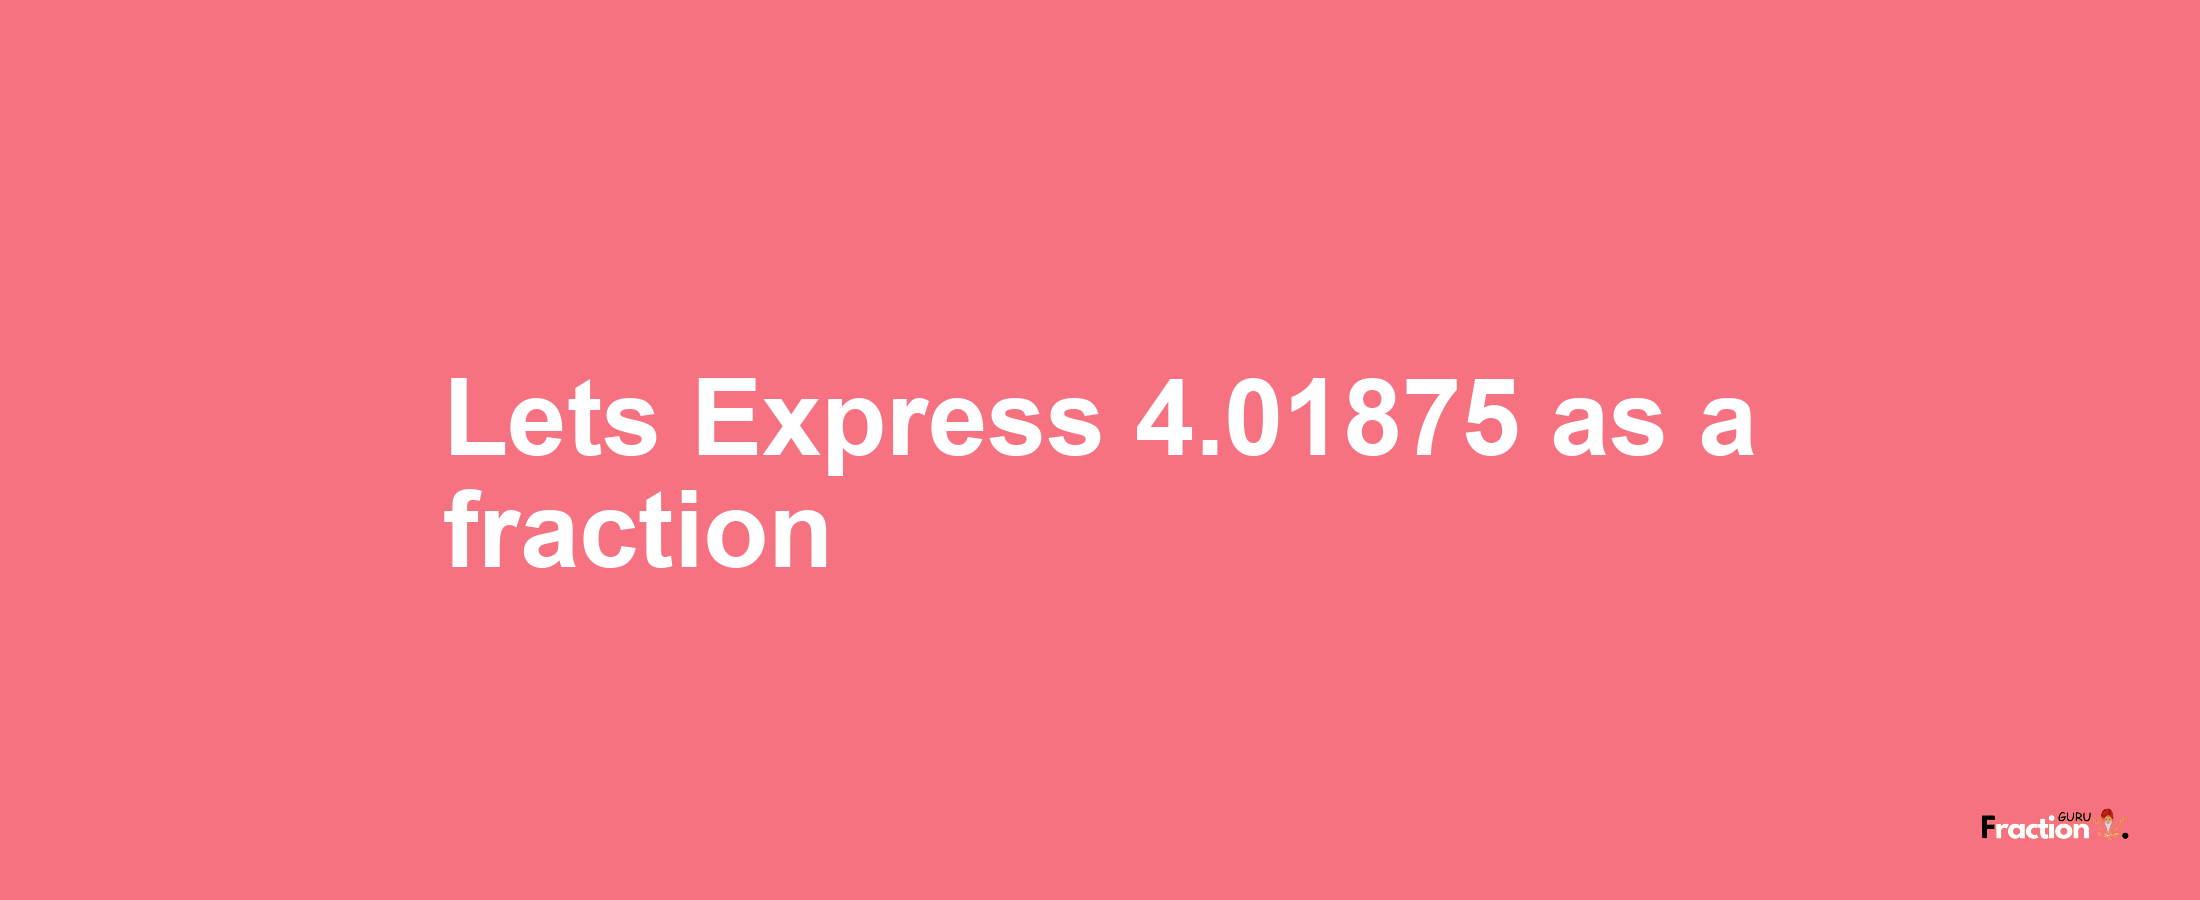 Lets Express 4.01875 as afraction